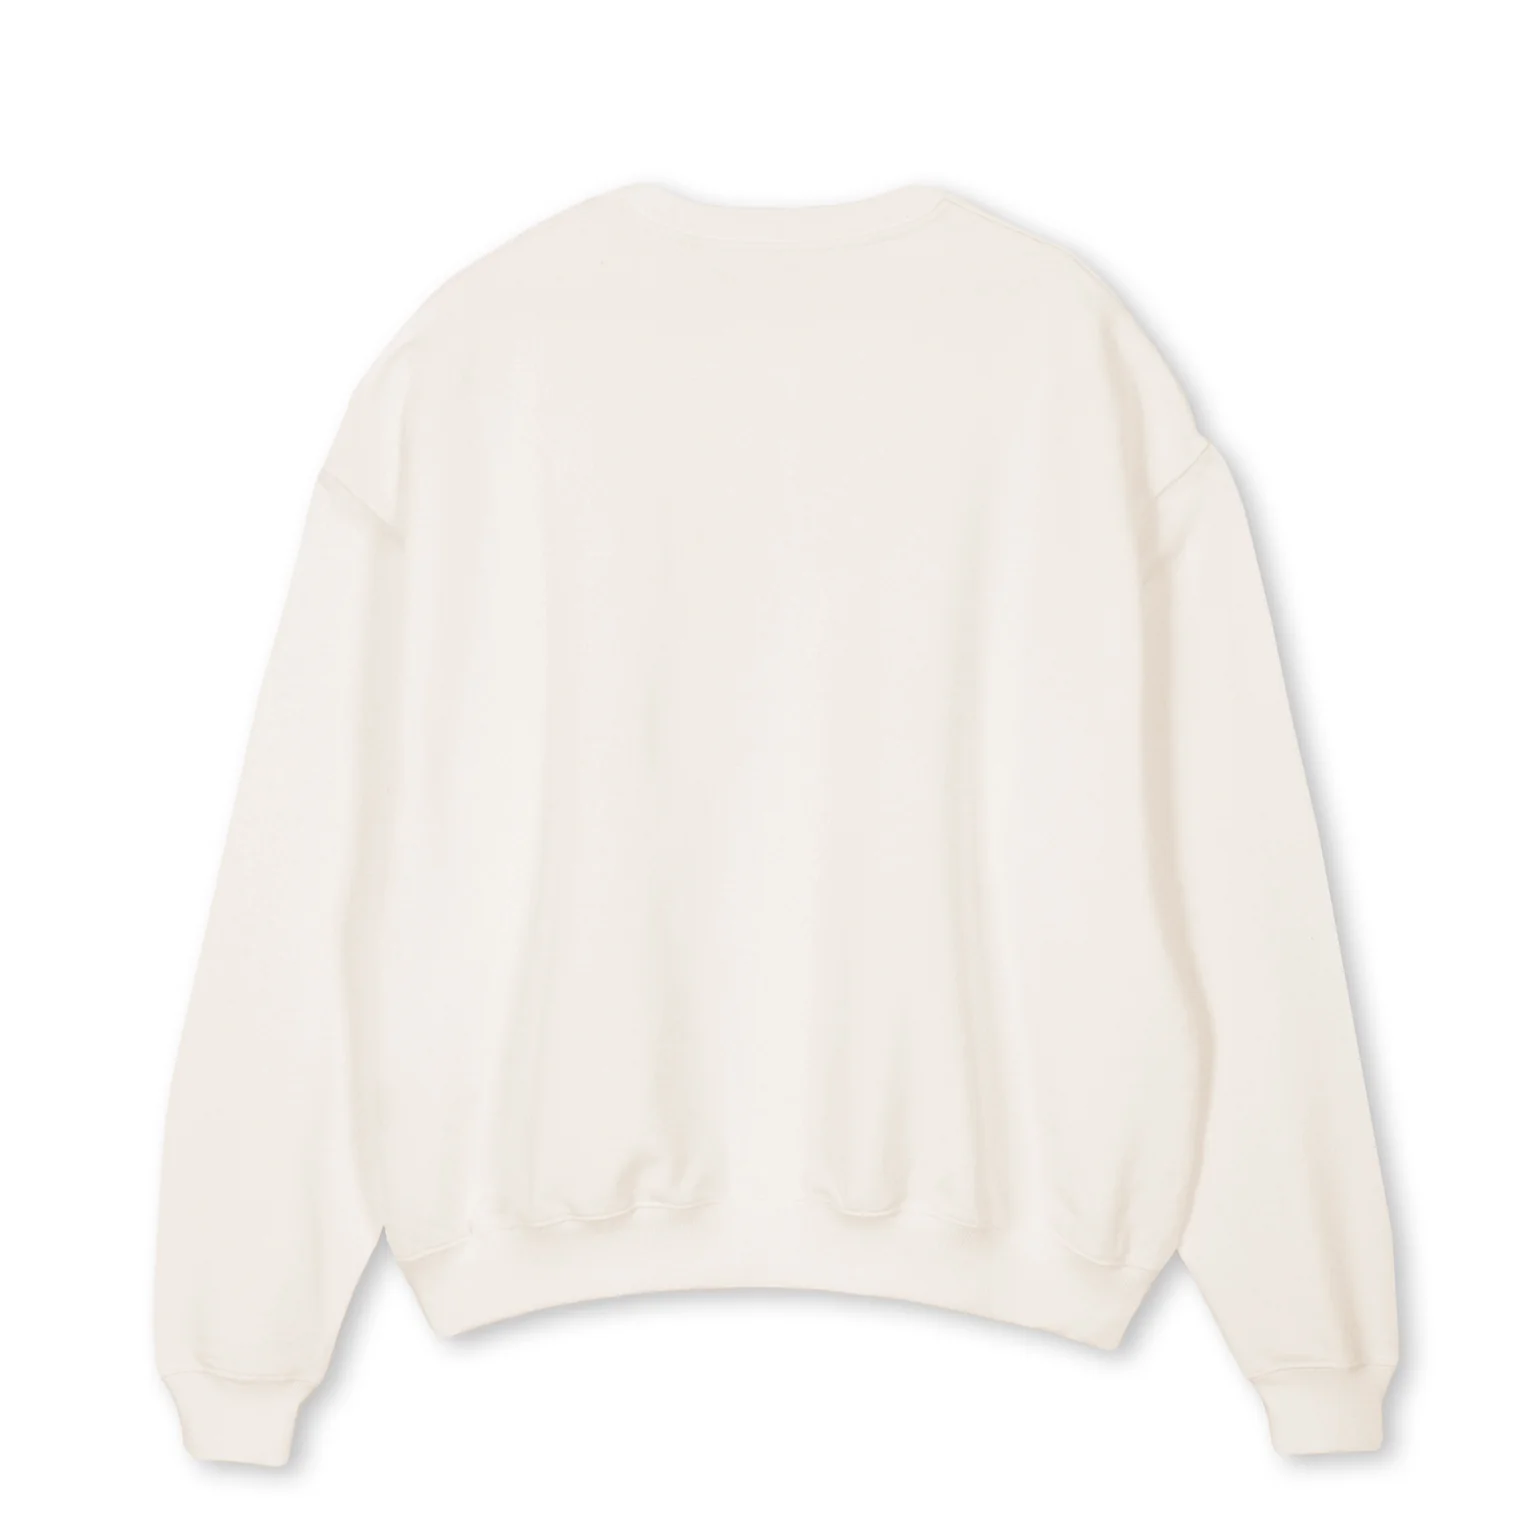 LL Oversized Sweater take me to